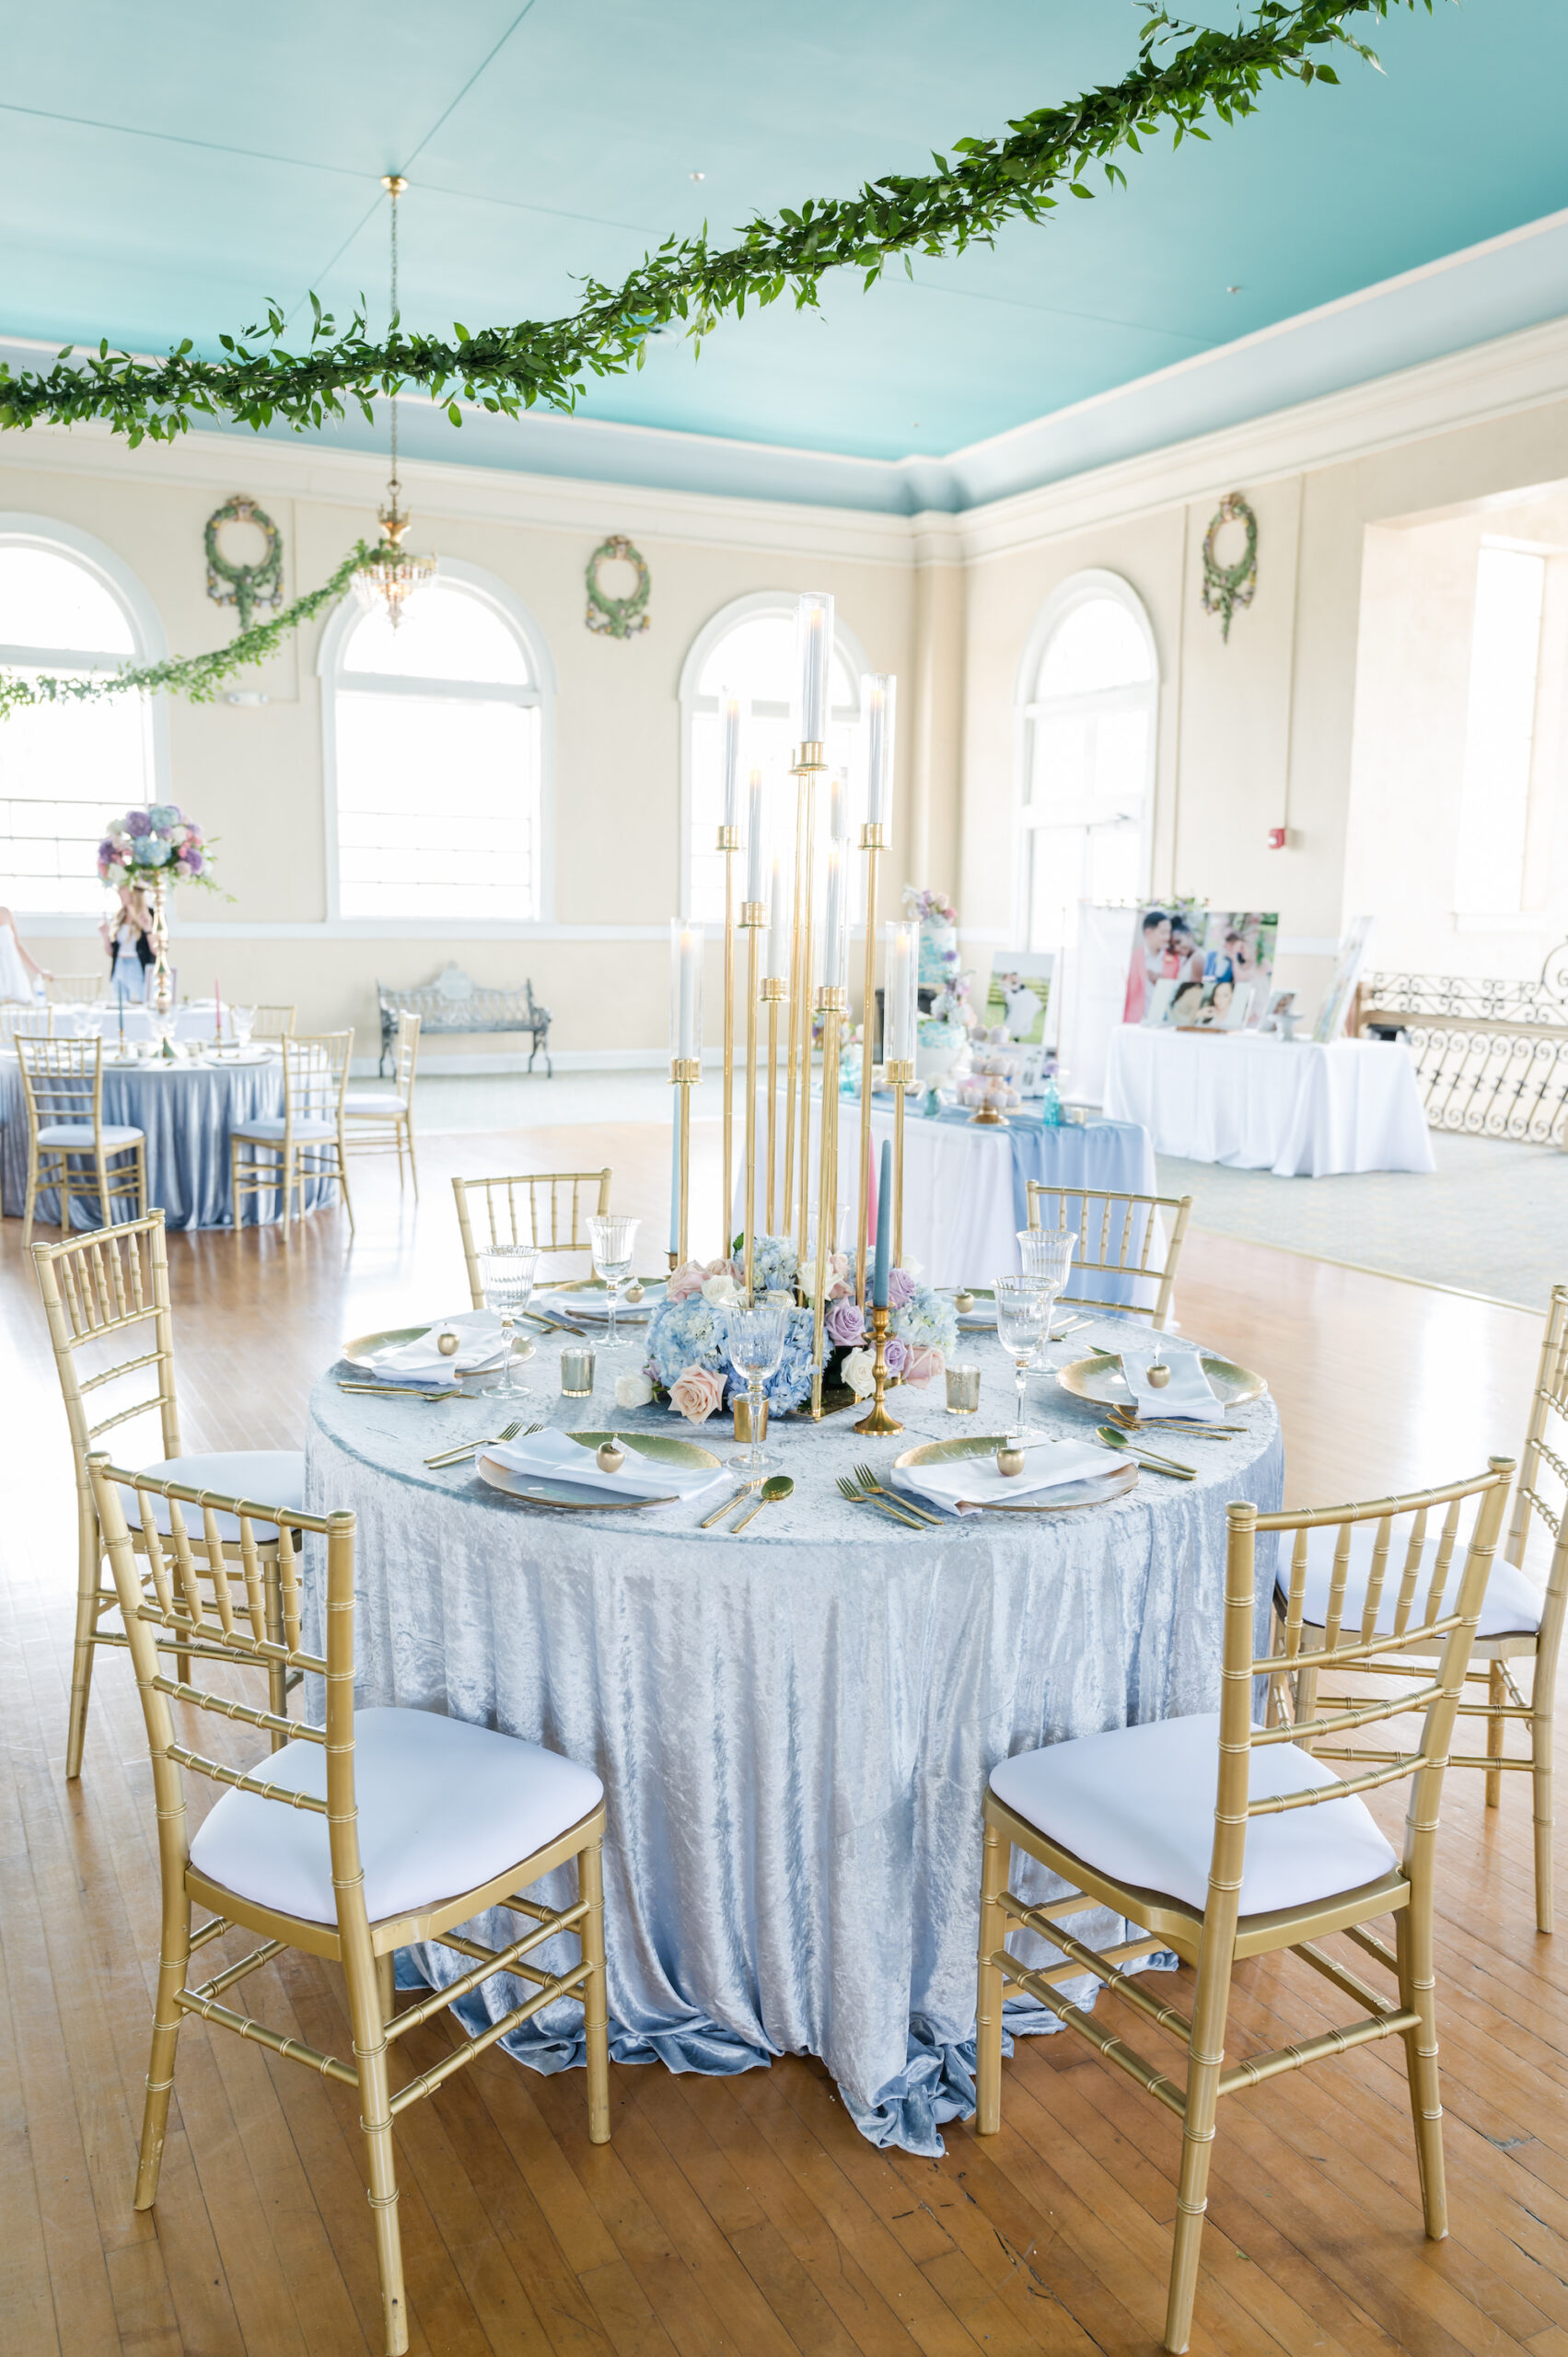 Pastel Blue Linen with Gold Chiaviari Chairs | Whimsical Spring Marie Antoinette Inspired Wedding Reception Ideas with Elegant Tall Gold Taper Candle Stand Wedding Centerpiece Inspiration